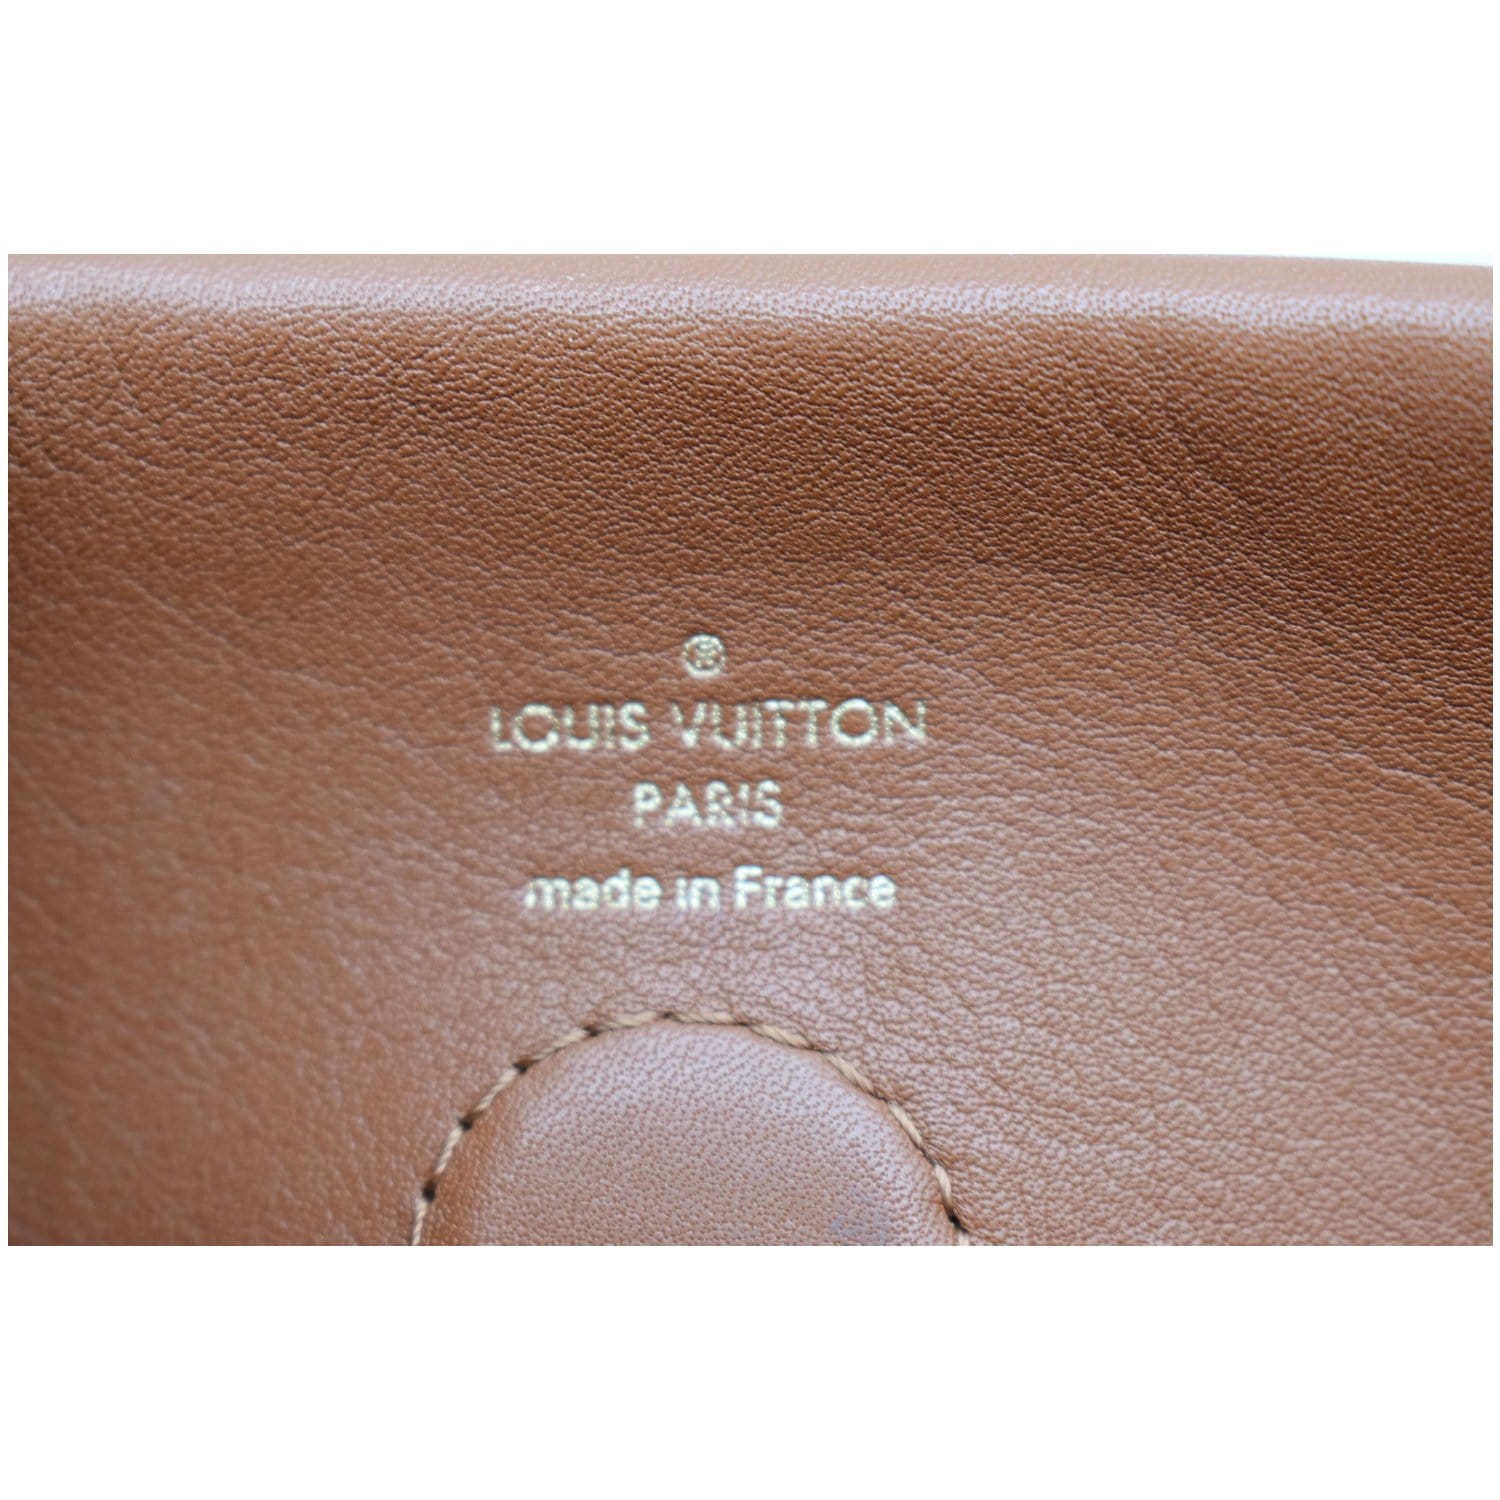 🎈SOLD❤️ Louis Vuitton Tuileries Besace